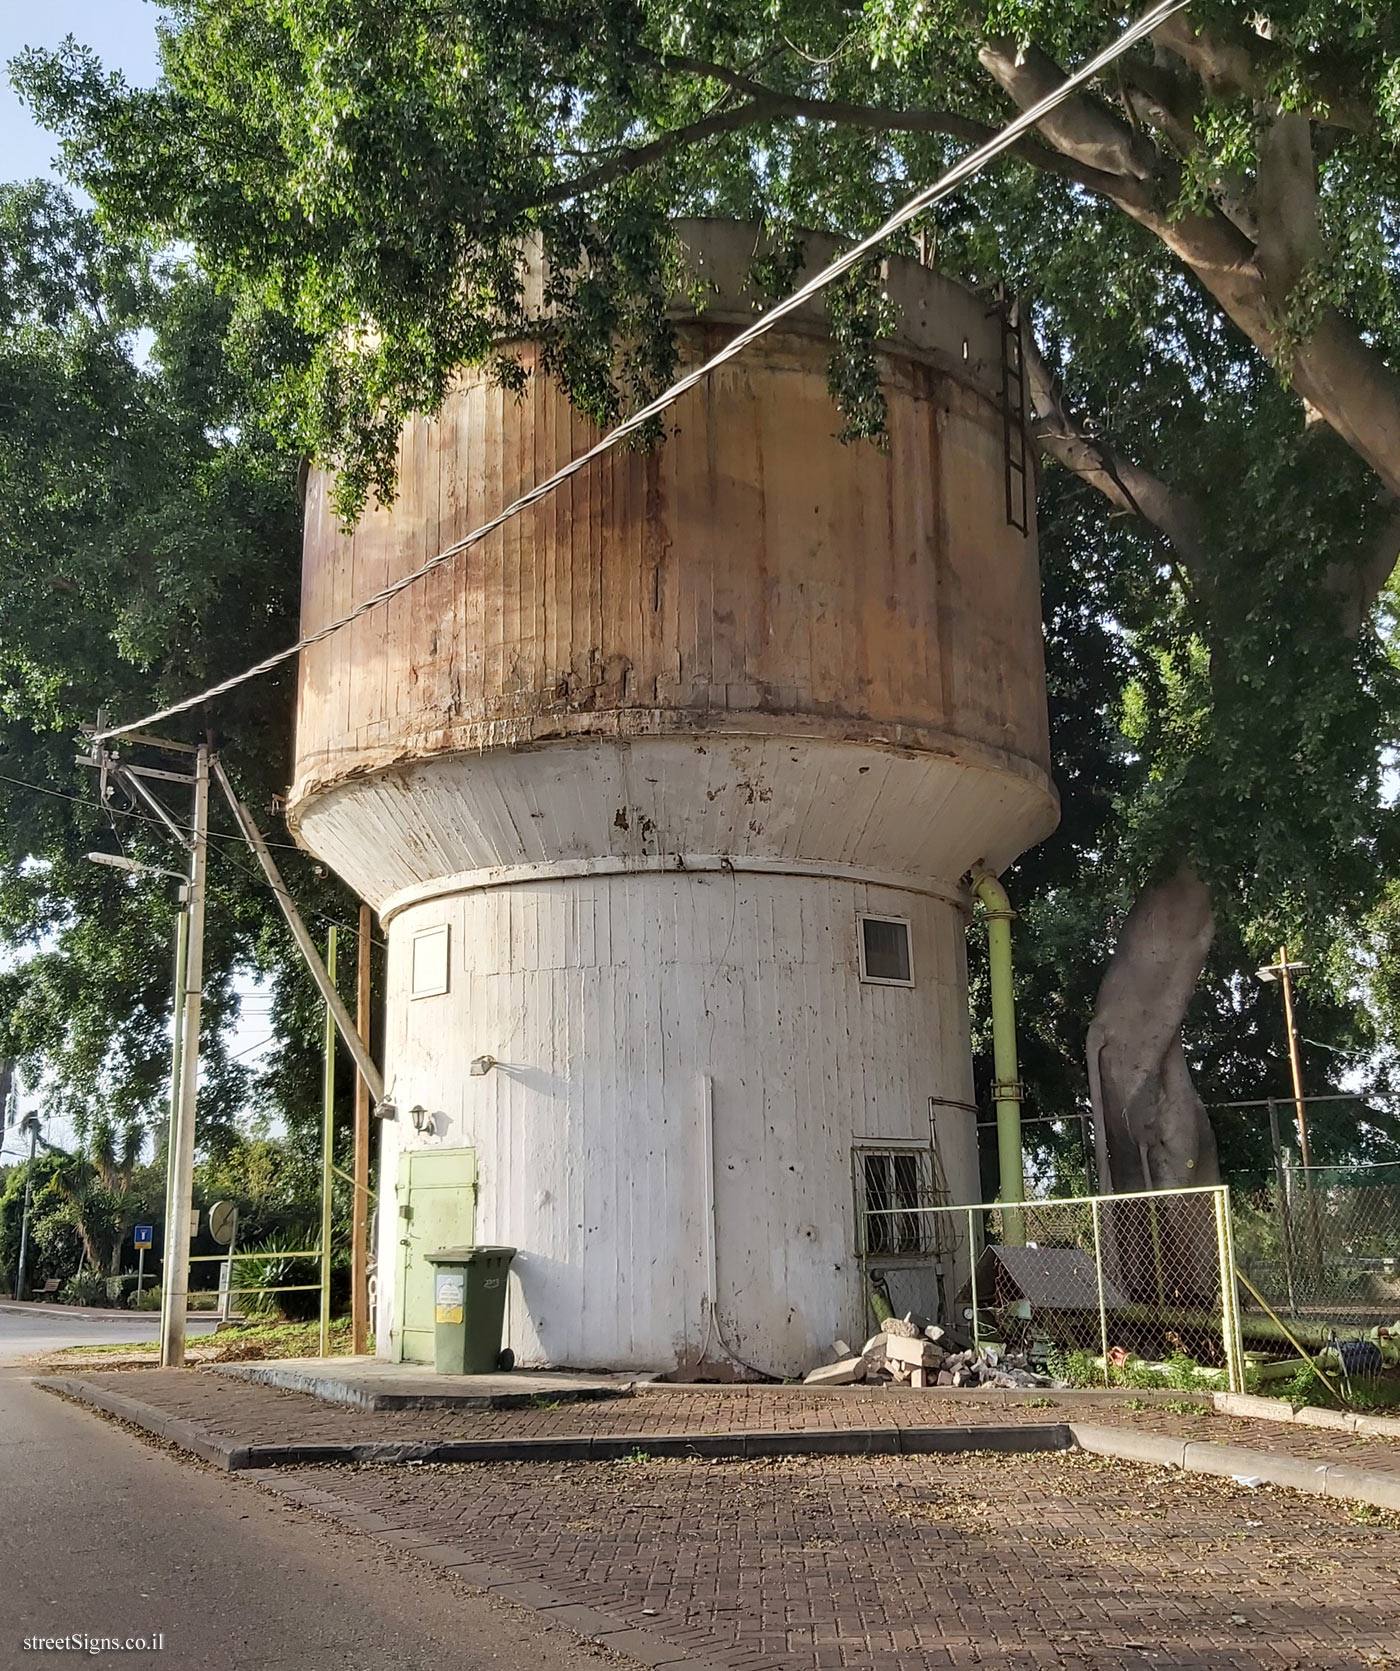 Givat Hen - The Water Tower - Shirati St 33, Givat Hen, Israel